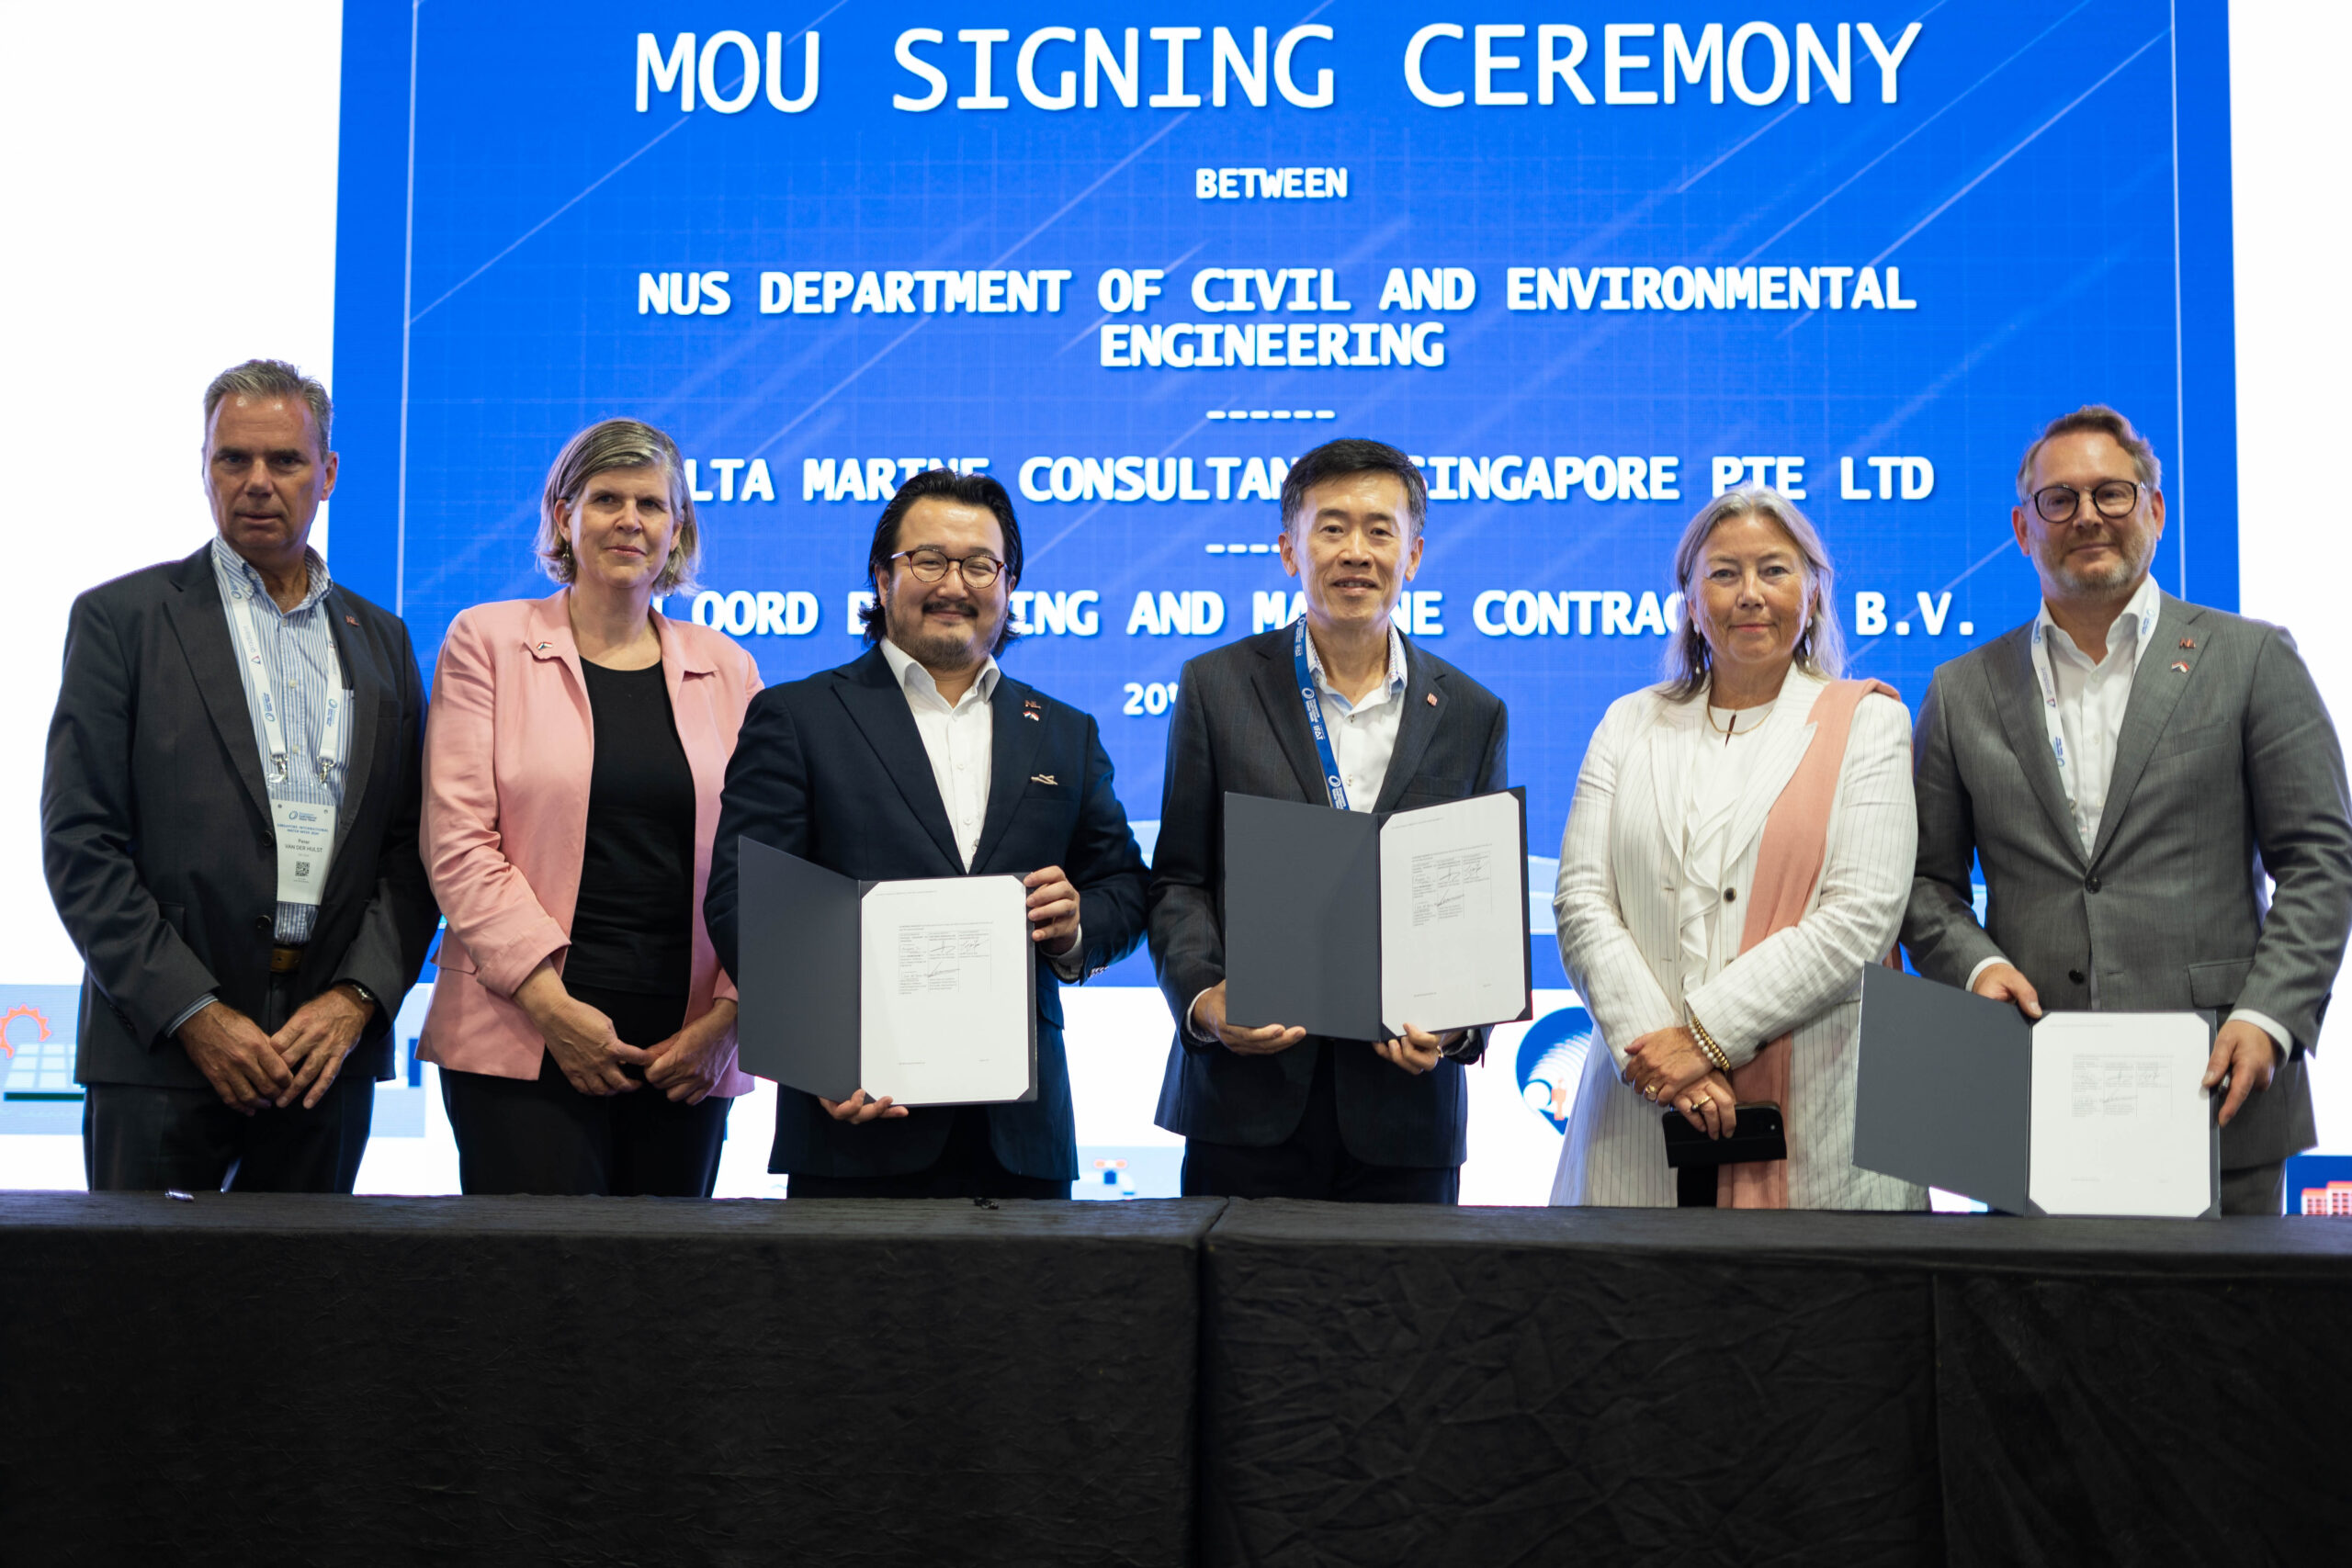 The MOU signing ceremony between CEE, Delta Marine Consultants and Van Oord was attended by the Dutch ambassador to Singapore, HE Anneke Adema (second from right).